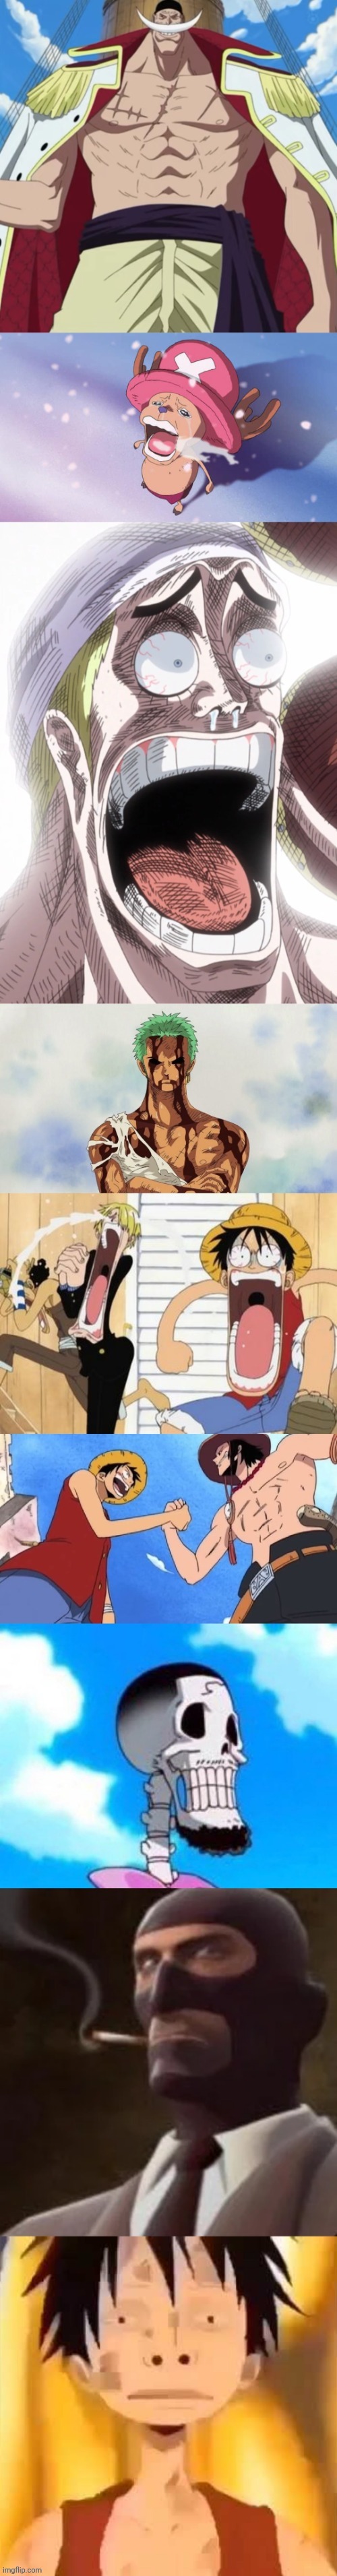 image tagged in one piece | made w/ Imgflip meme maker